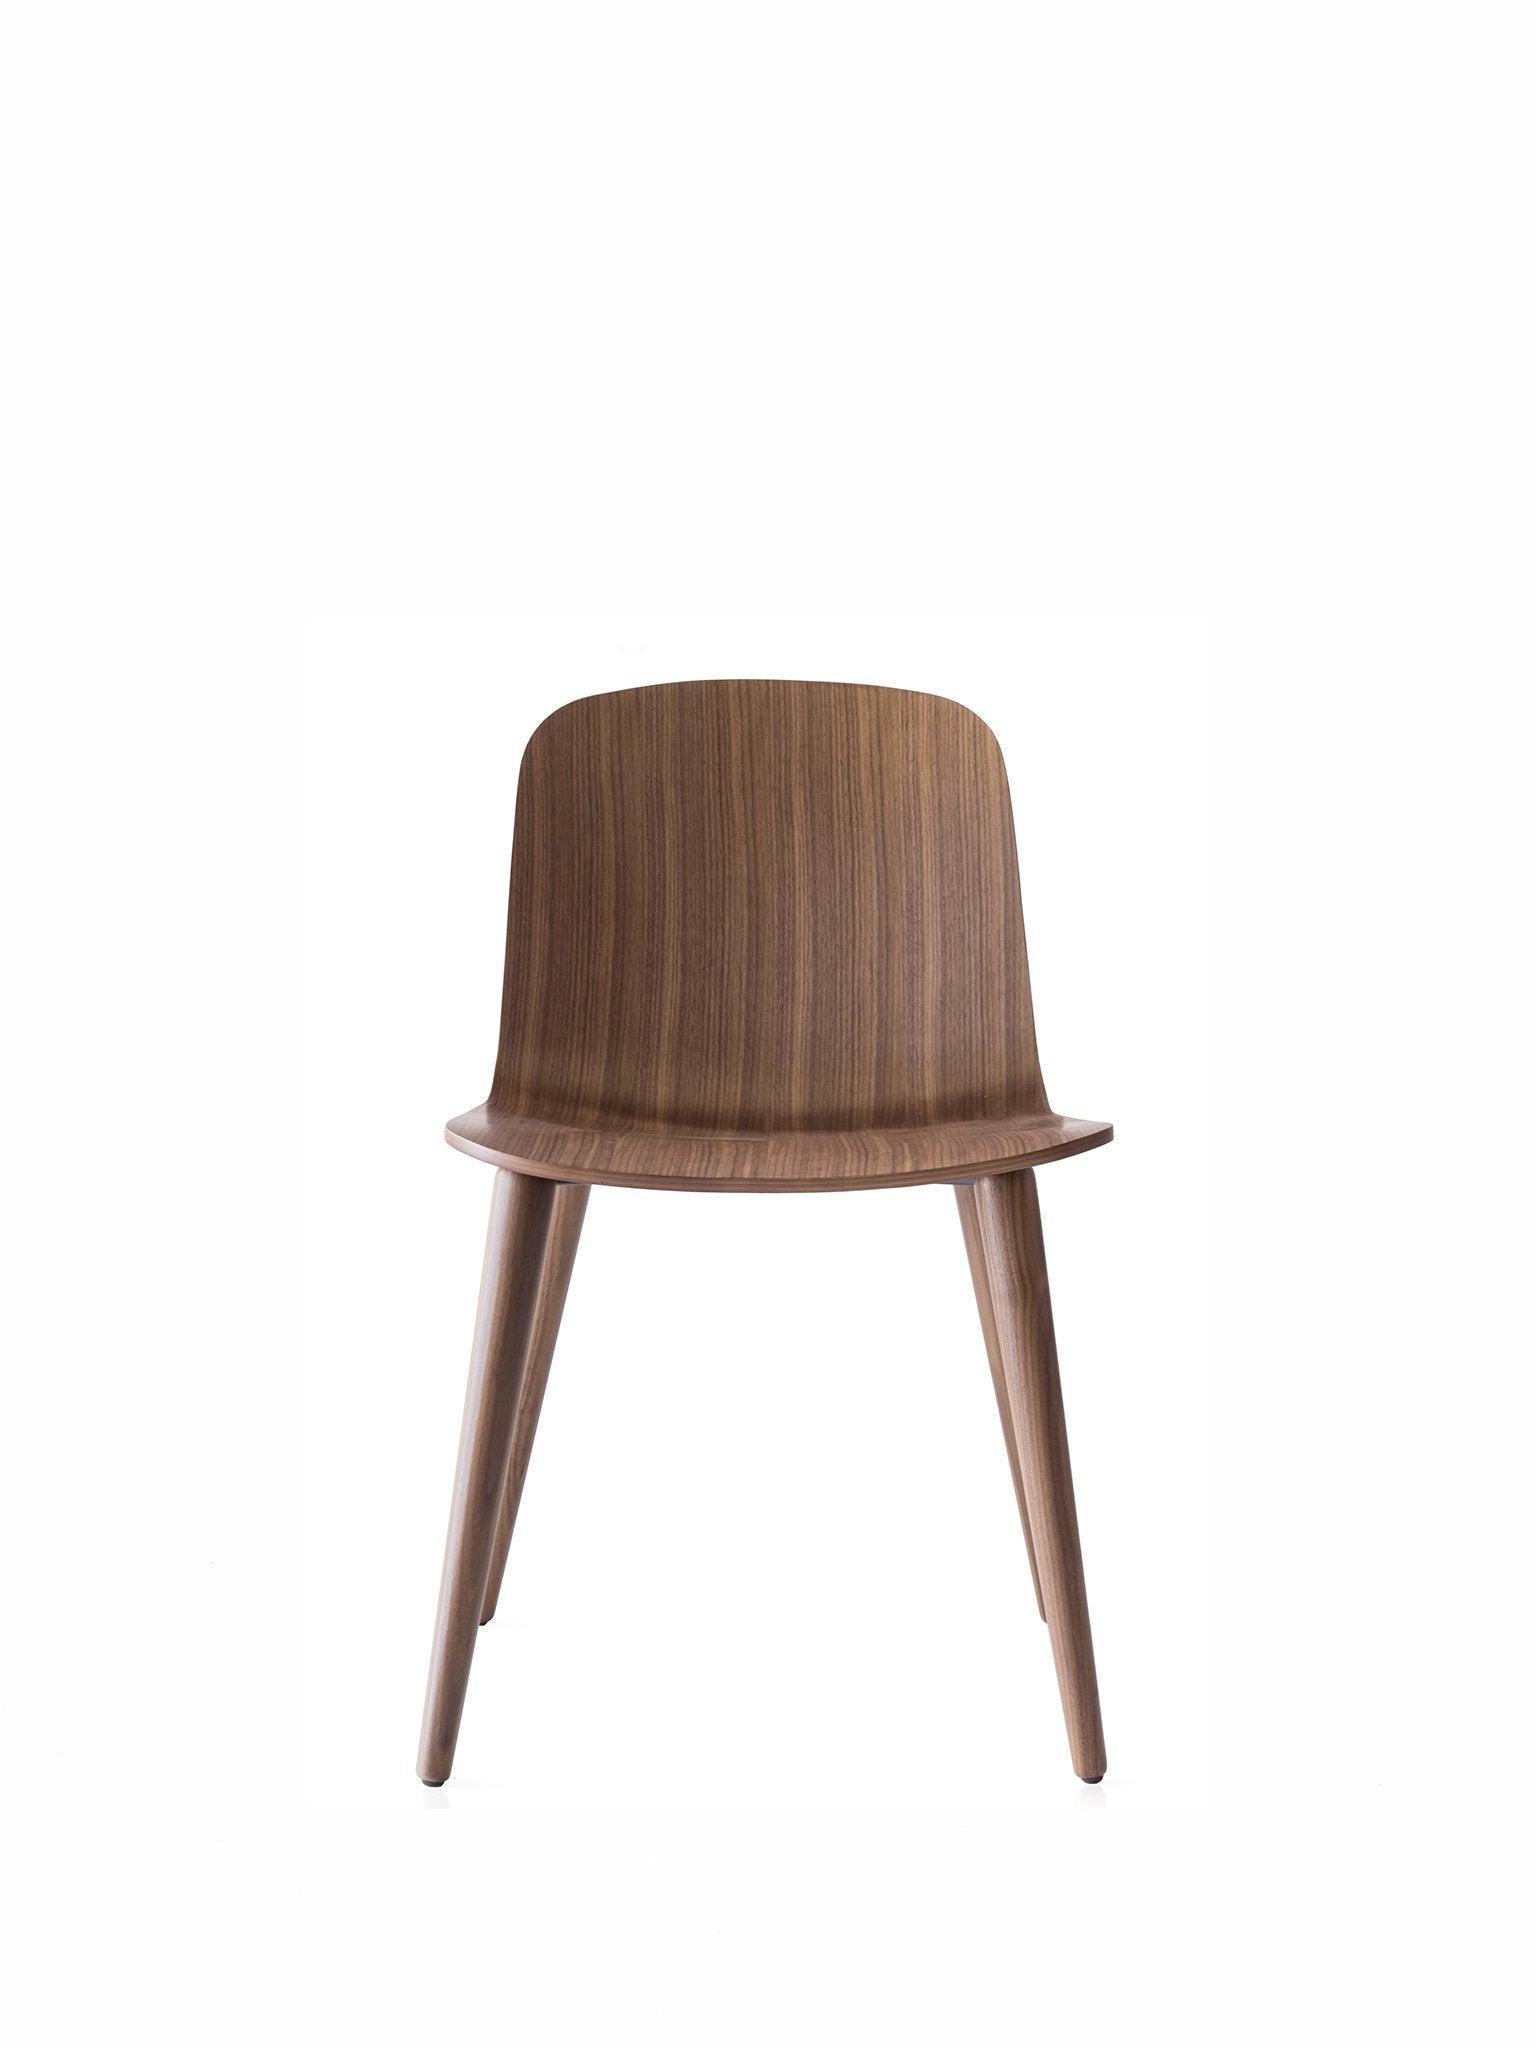 Bacco Wood Side Chair-Job's-Contract Furniture Store